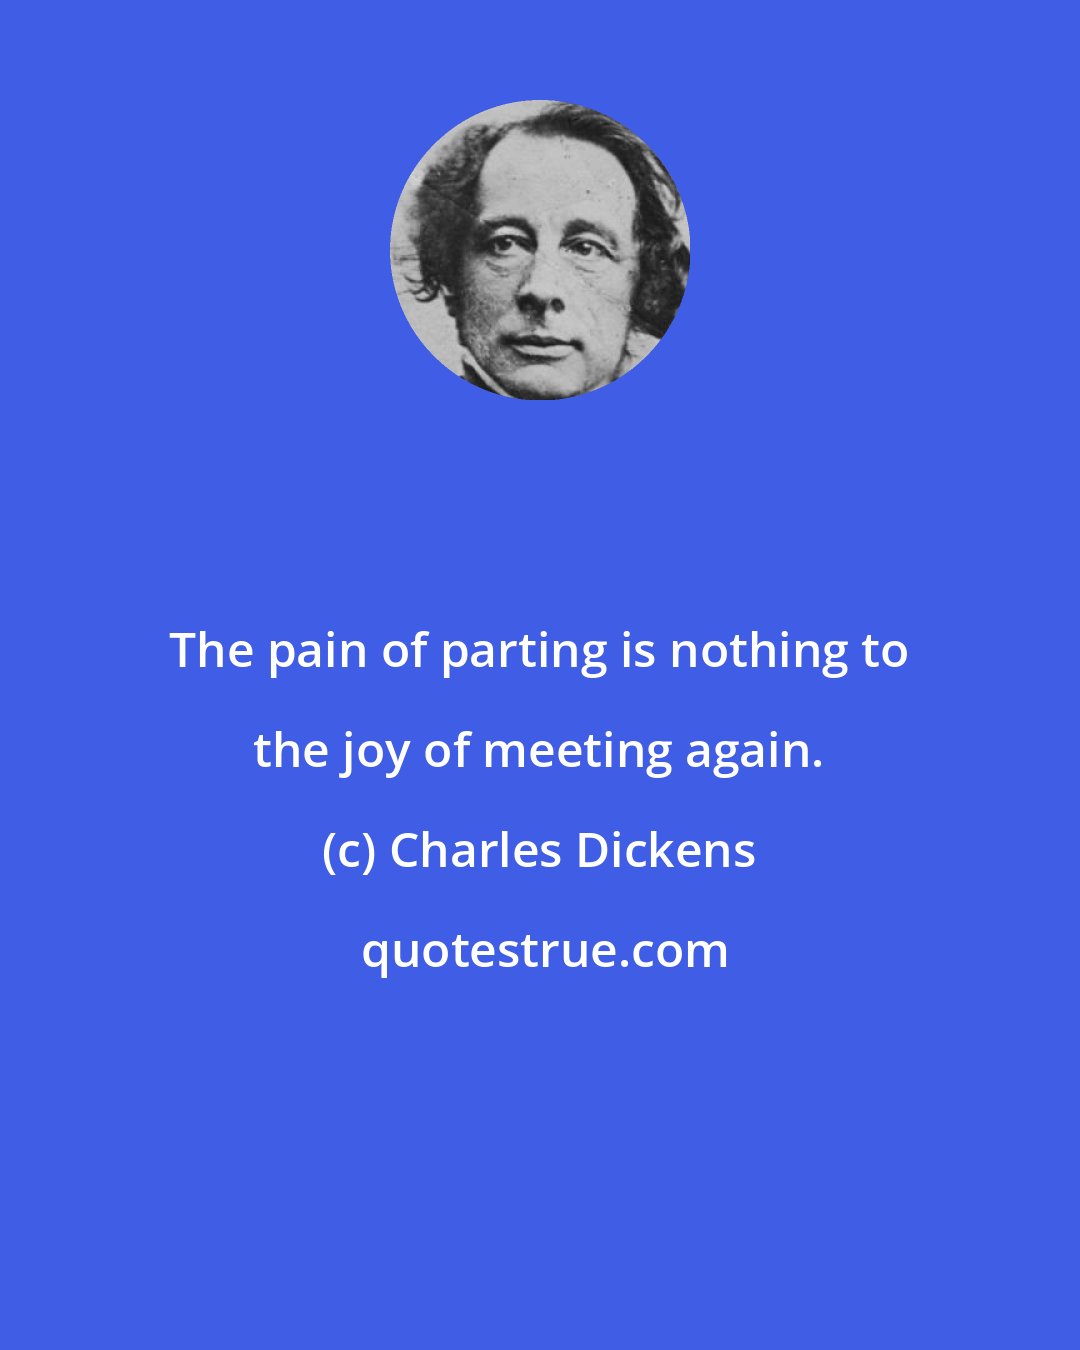 Charles Dickens: The pain of parting is nothing to the joy of meeting again.